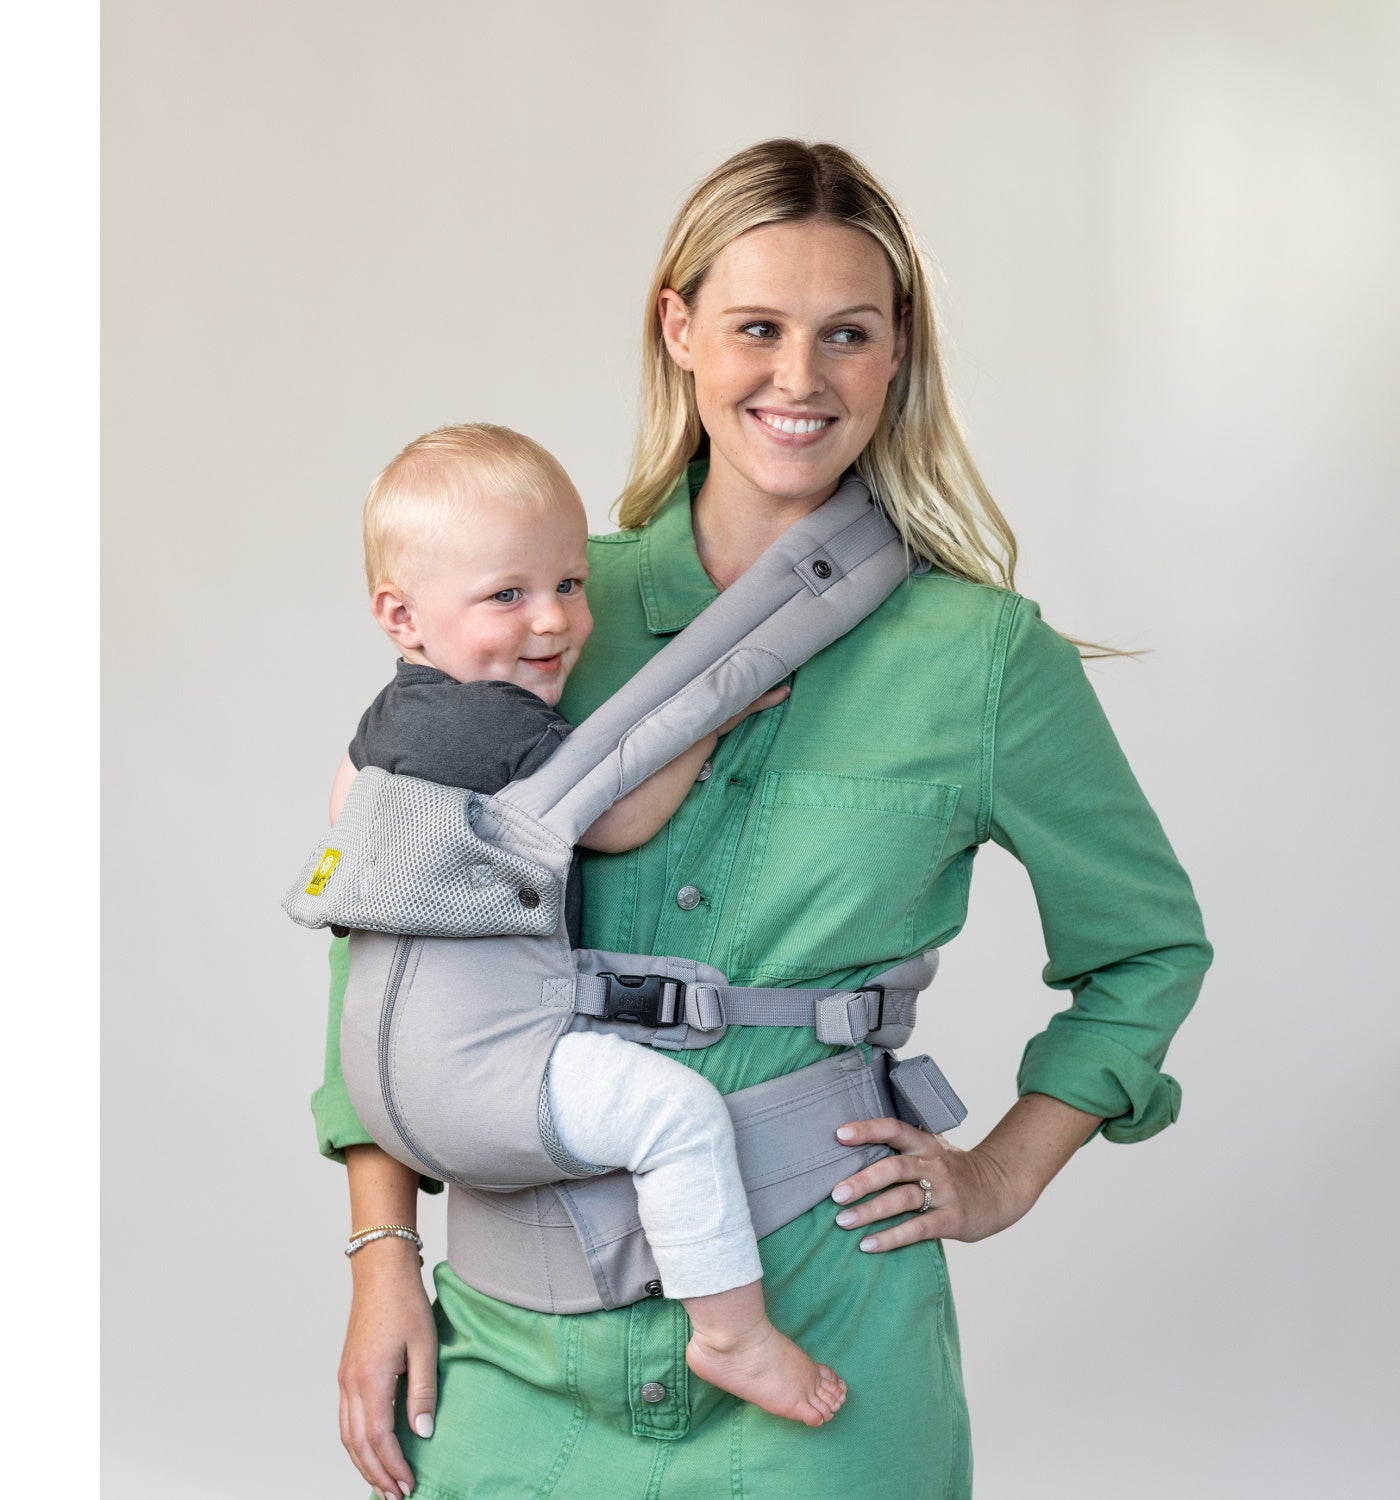 Mum and baby in the LILLEbaby carrier, hip carry position. The Babywearing Series. Belly Beyond.